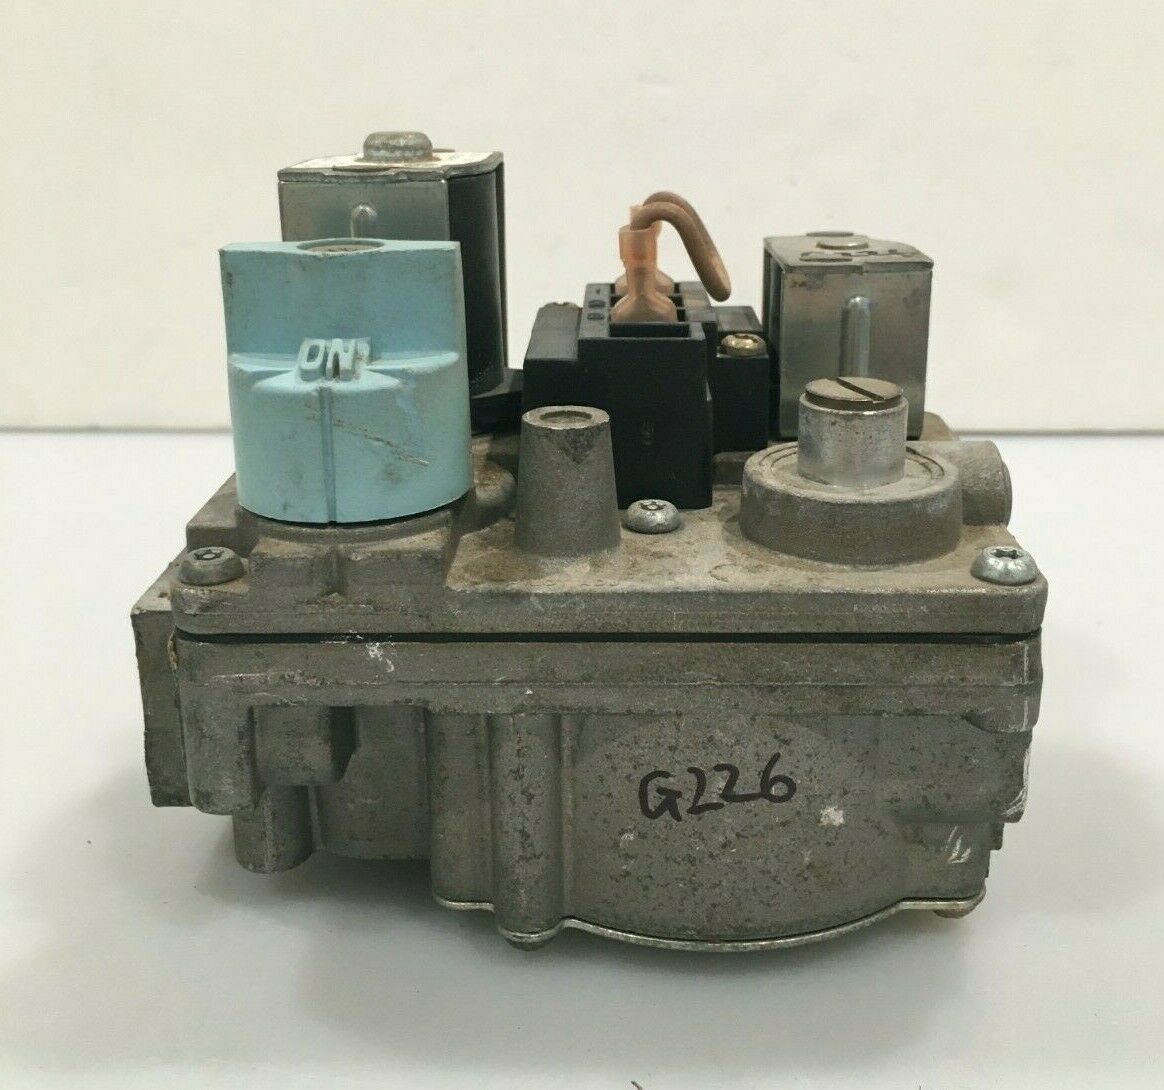 Primary image for WHITE RODGERS Gas Valve 36E36 252 C729668P01 used #G226